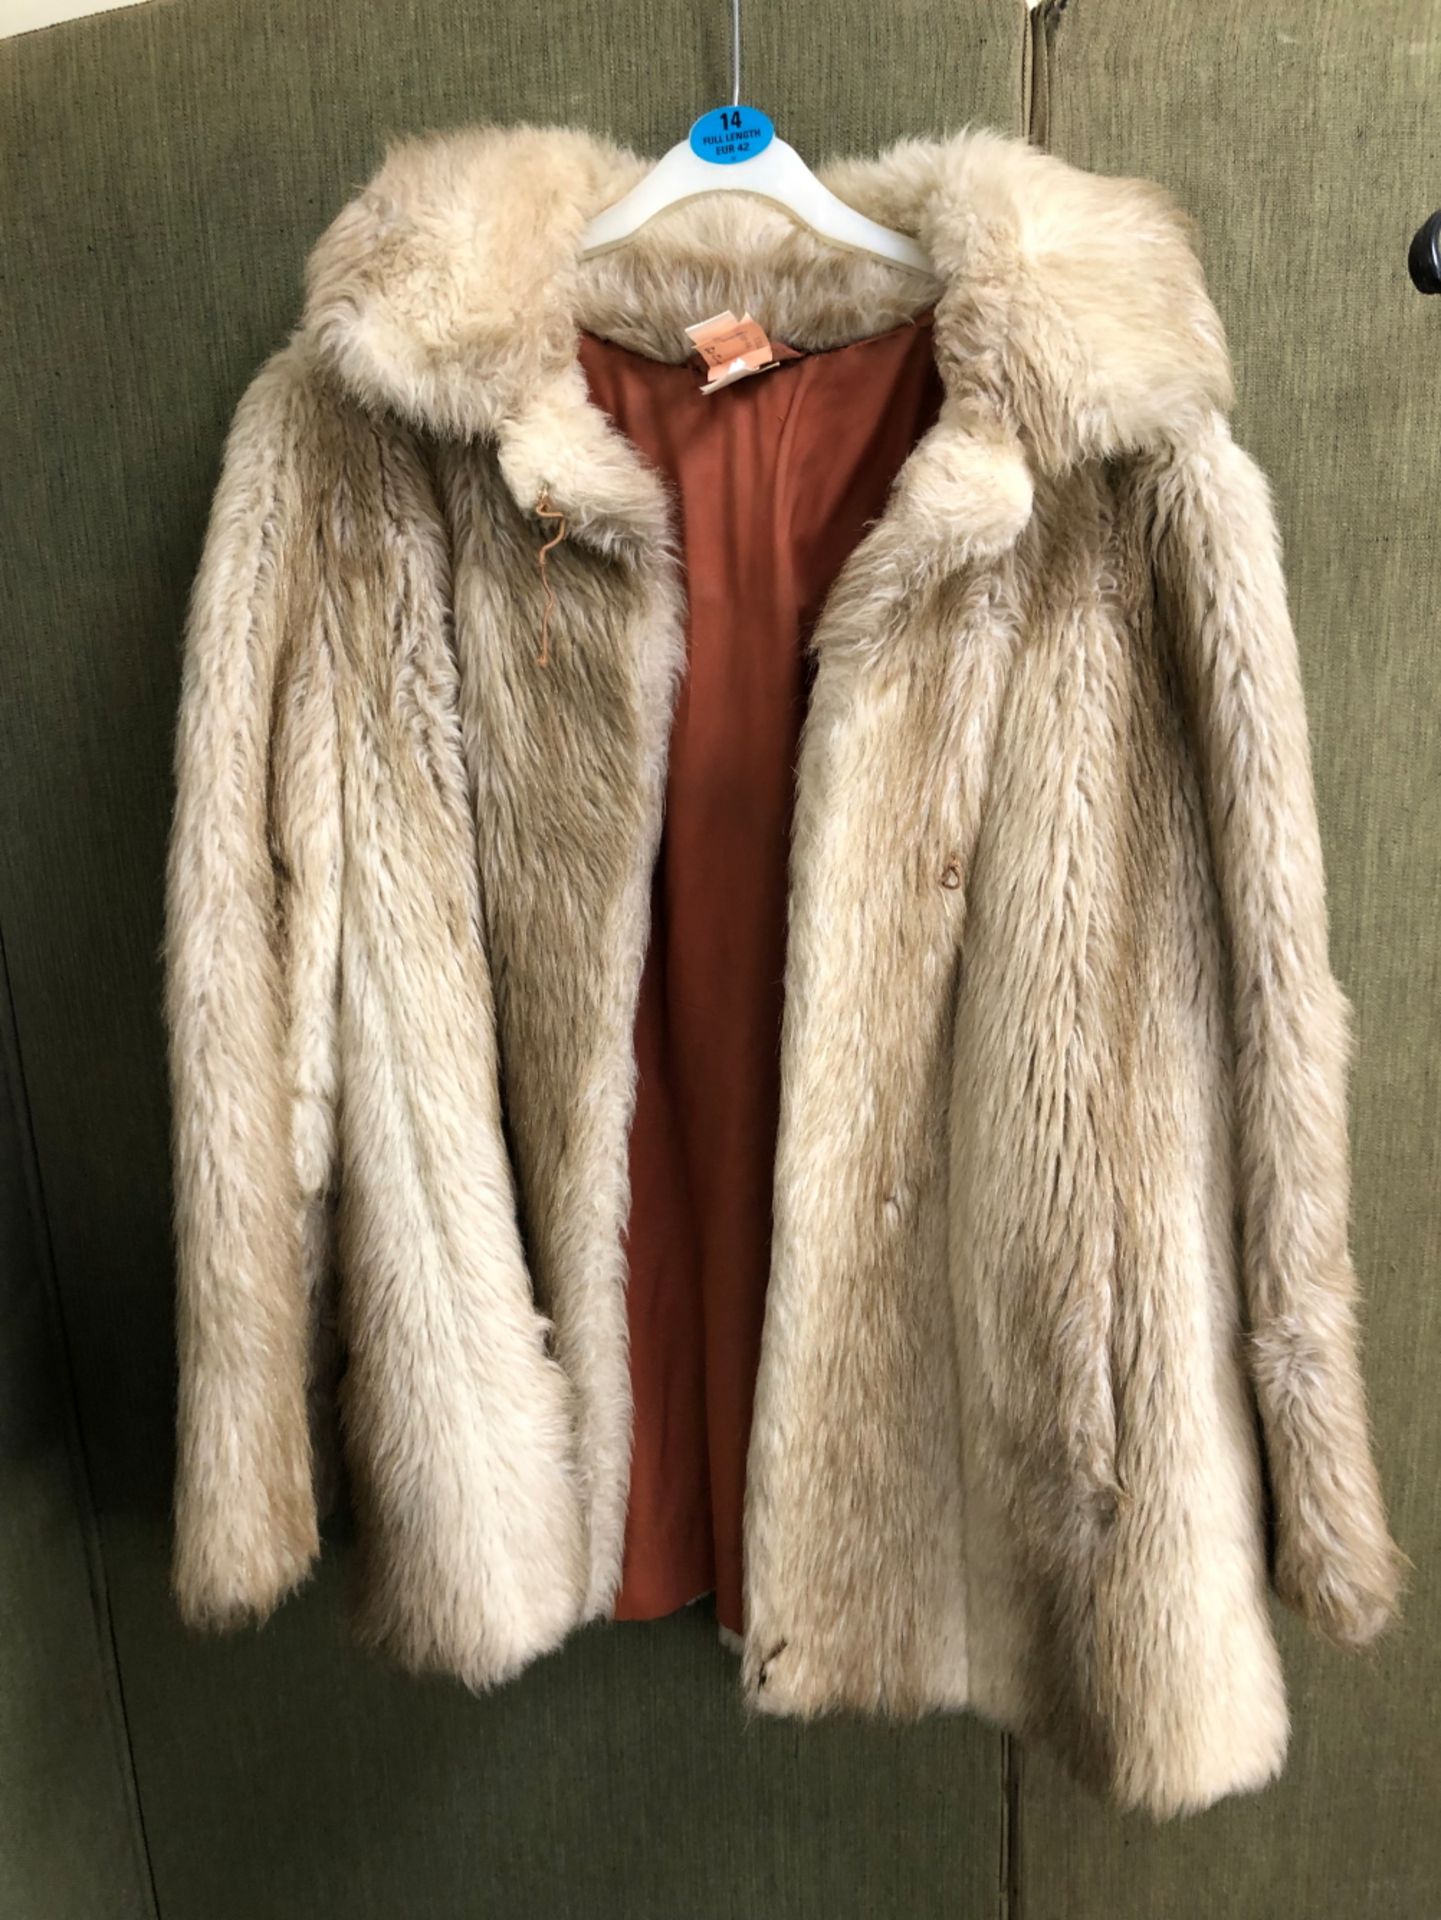 JACKET, GREY LEATHER, SIZE 14 AND A JACKET, B.Y LUXURIOUS SIMULATED FUR TERRACOTTA LINED GREY/ - Image 5 of 9